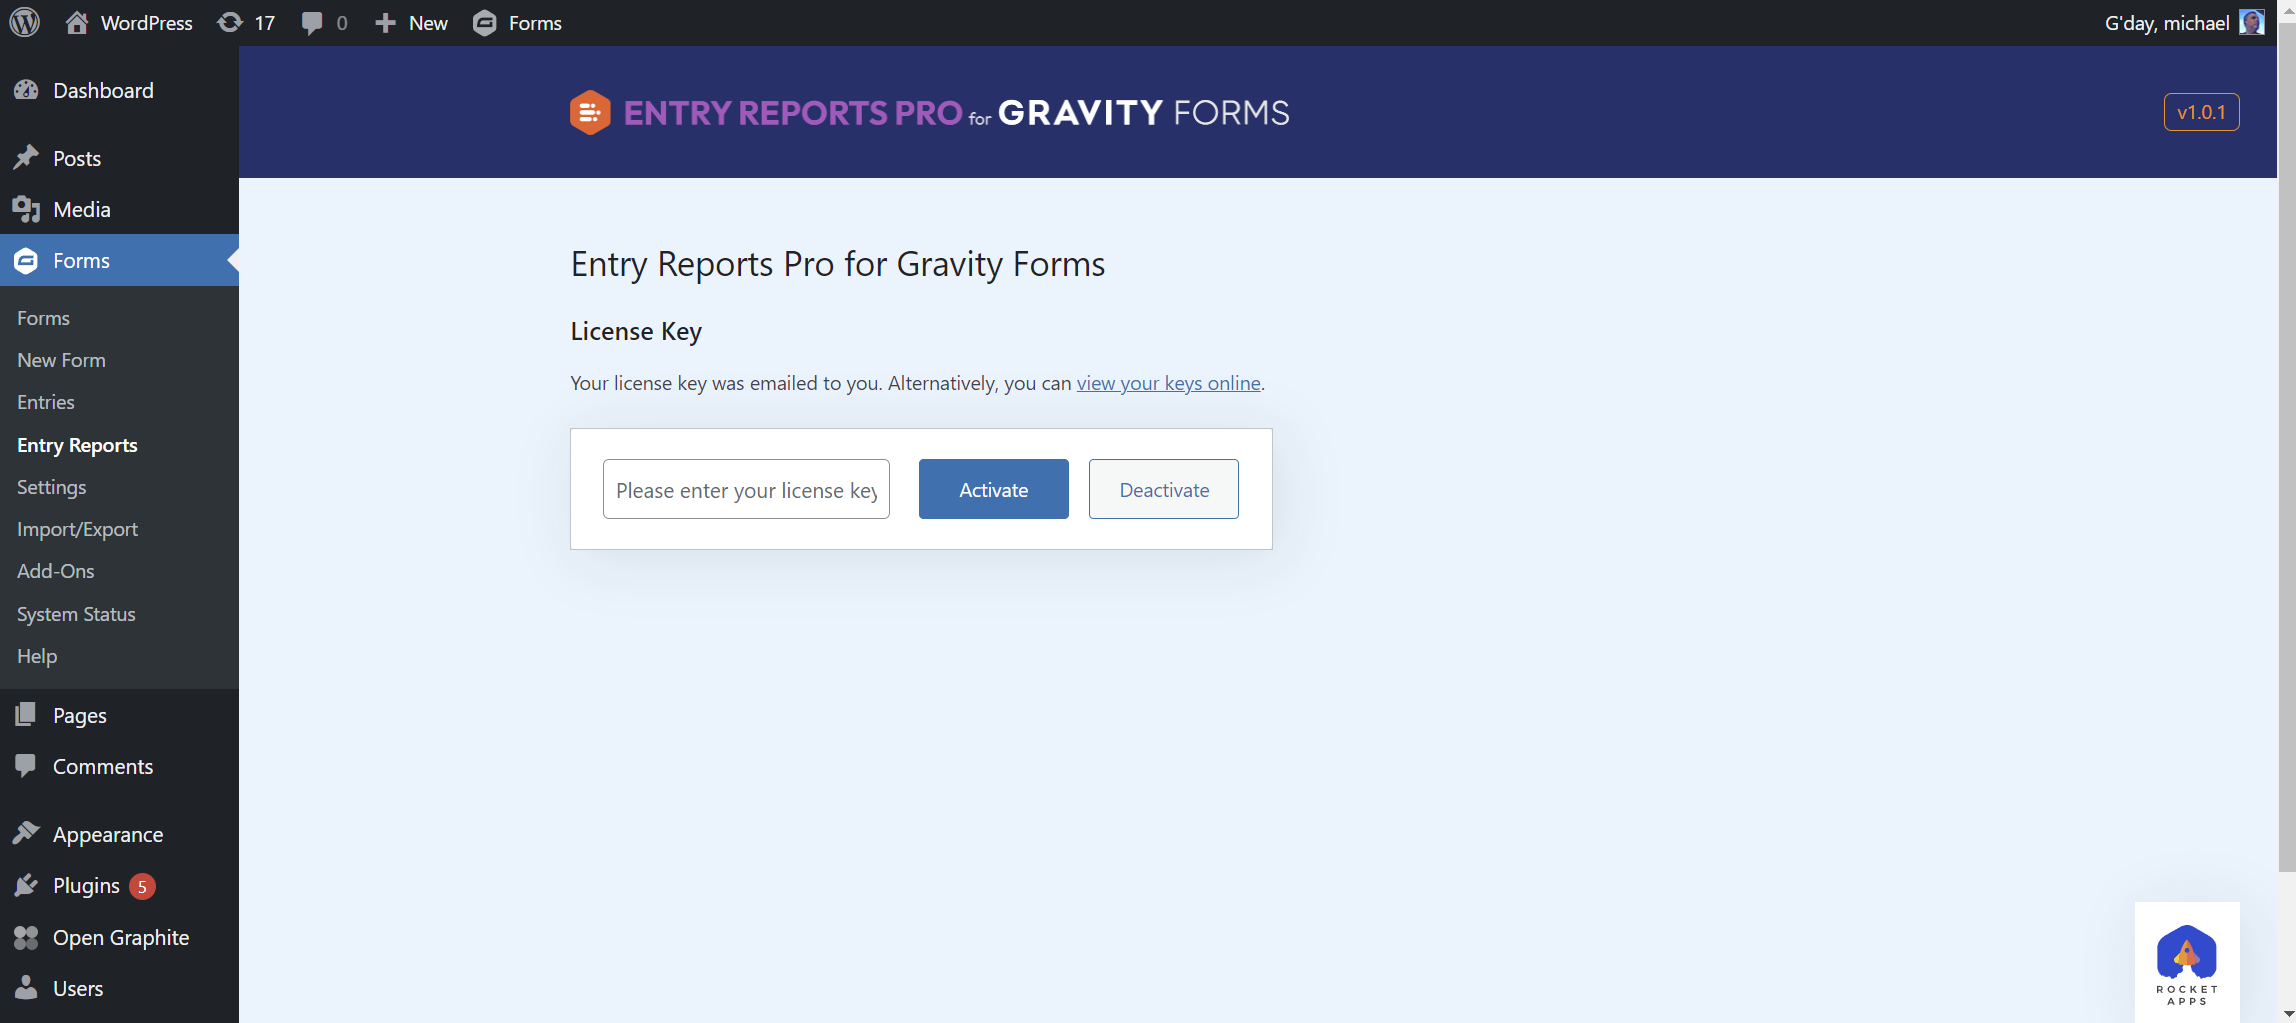 Entry Reports Pro for Gravity Forms